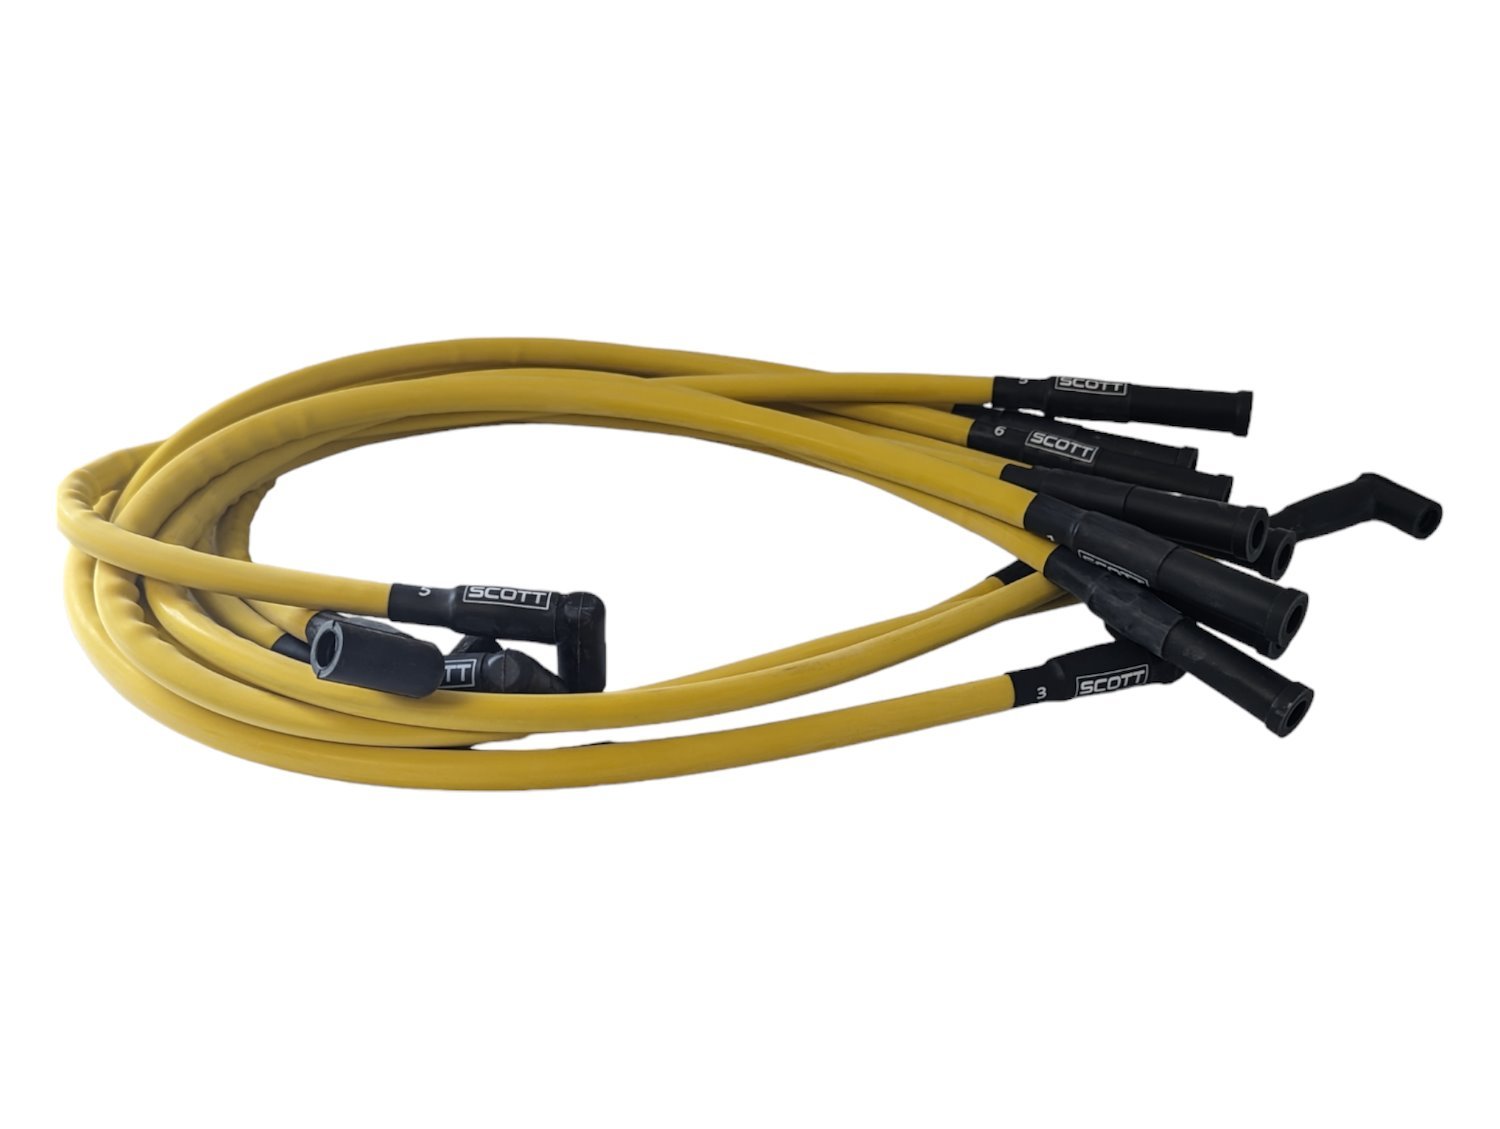 SPW300-CH-428-7 Super Mag Fiberglass-Oversleeved Spark Plug Wire Set for Big Block Ford FE [Yellow]